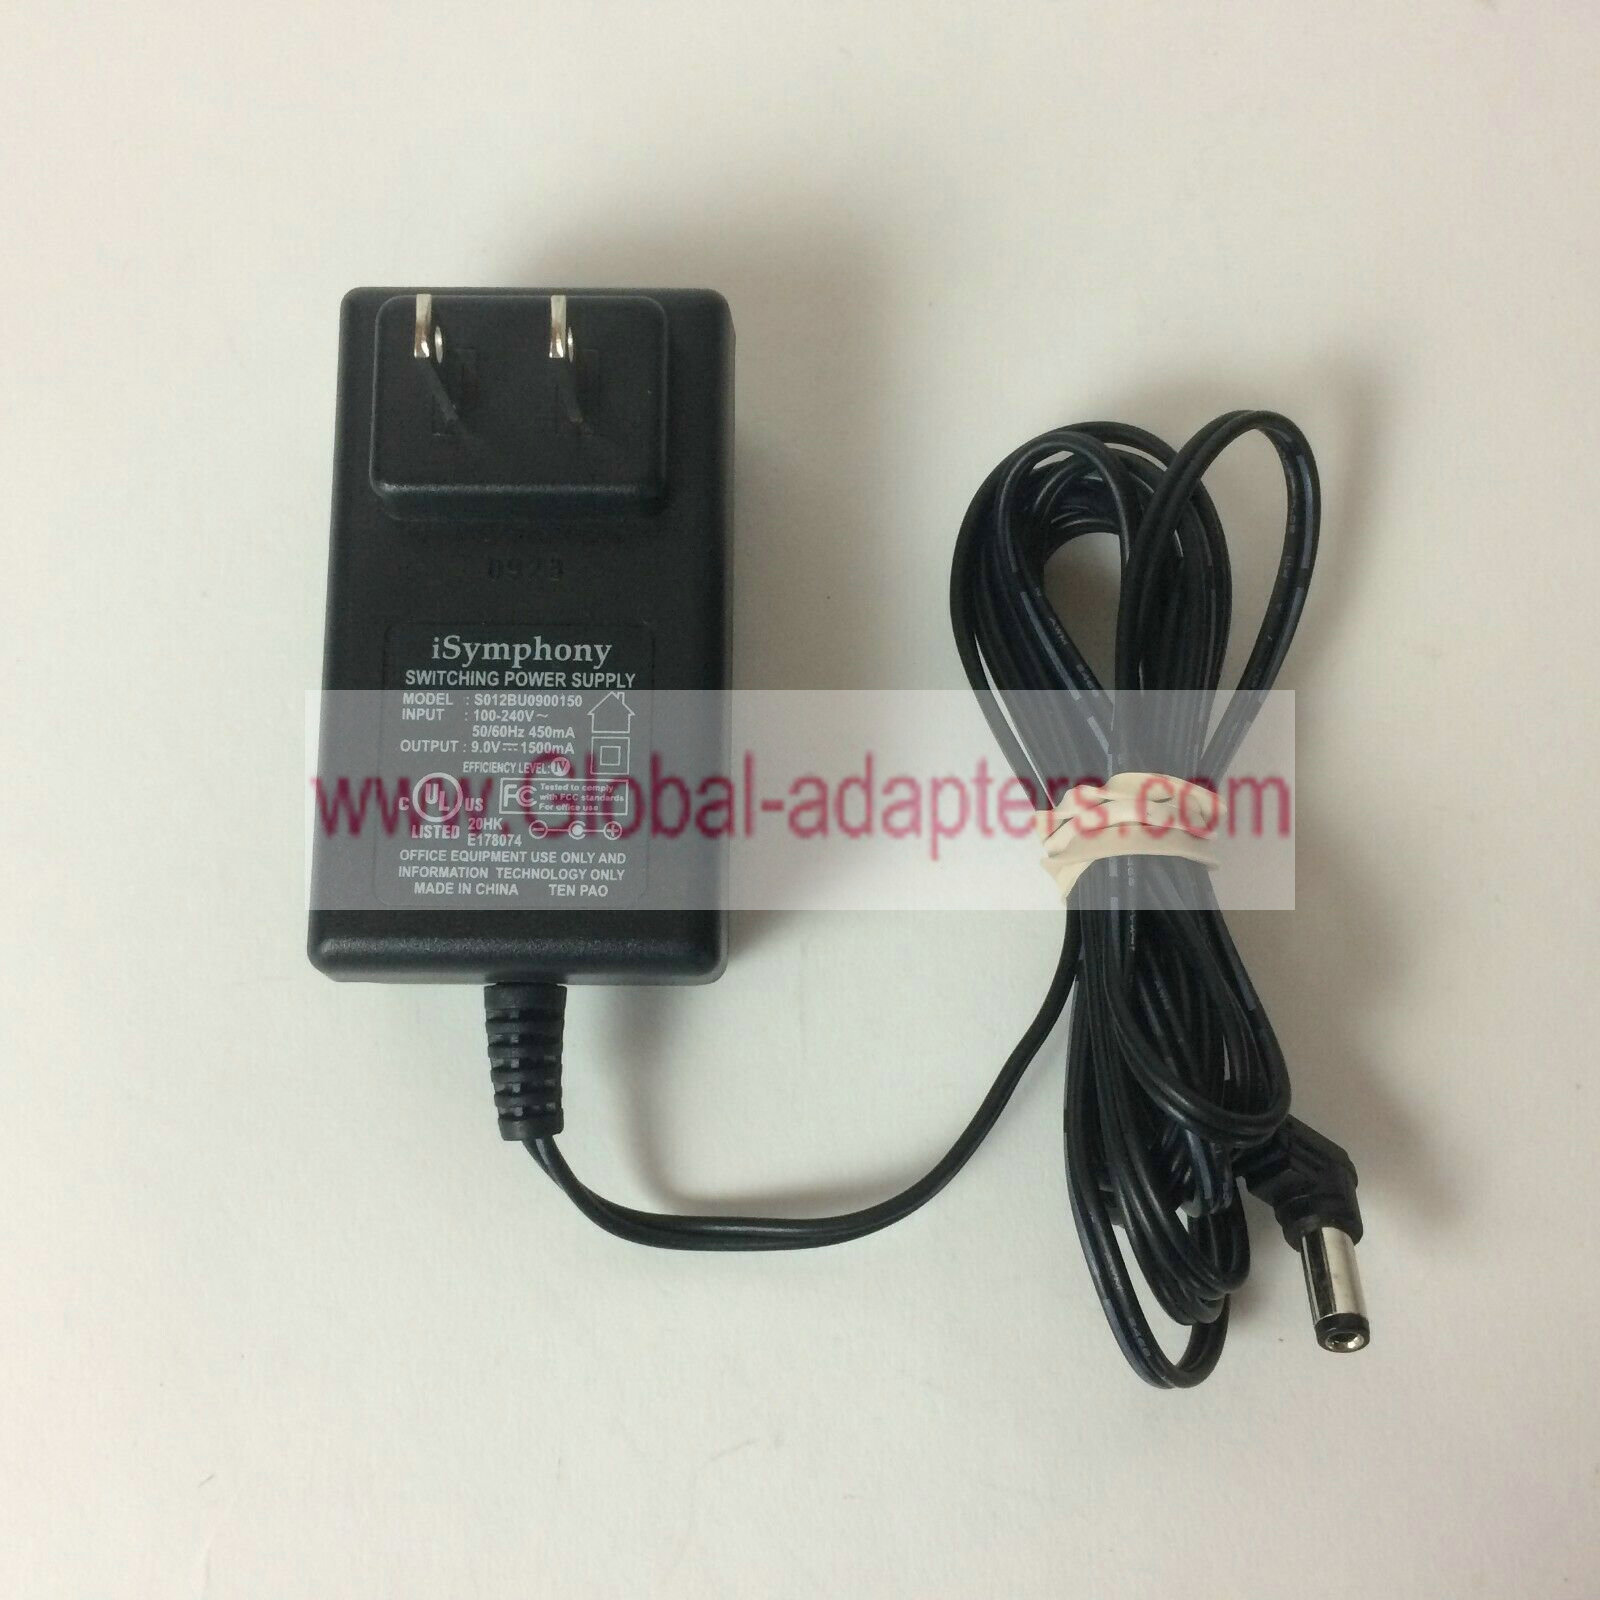 New iSymphony S012BU0900150 Switching Power Supply AC Adapter 9.0V 1500mA - Click Image to Close